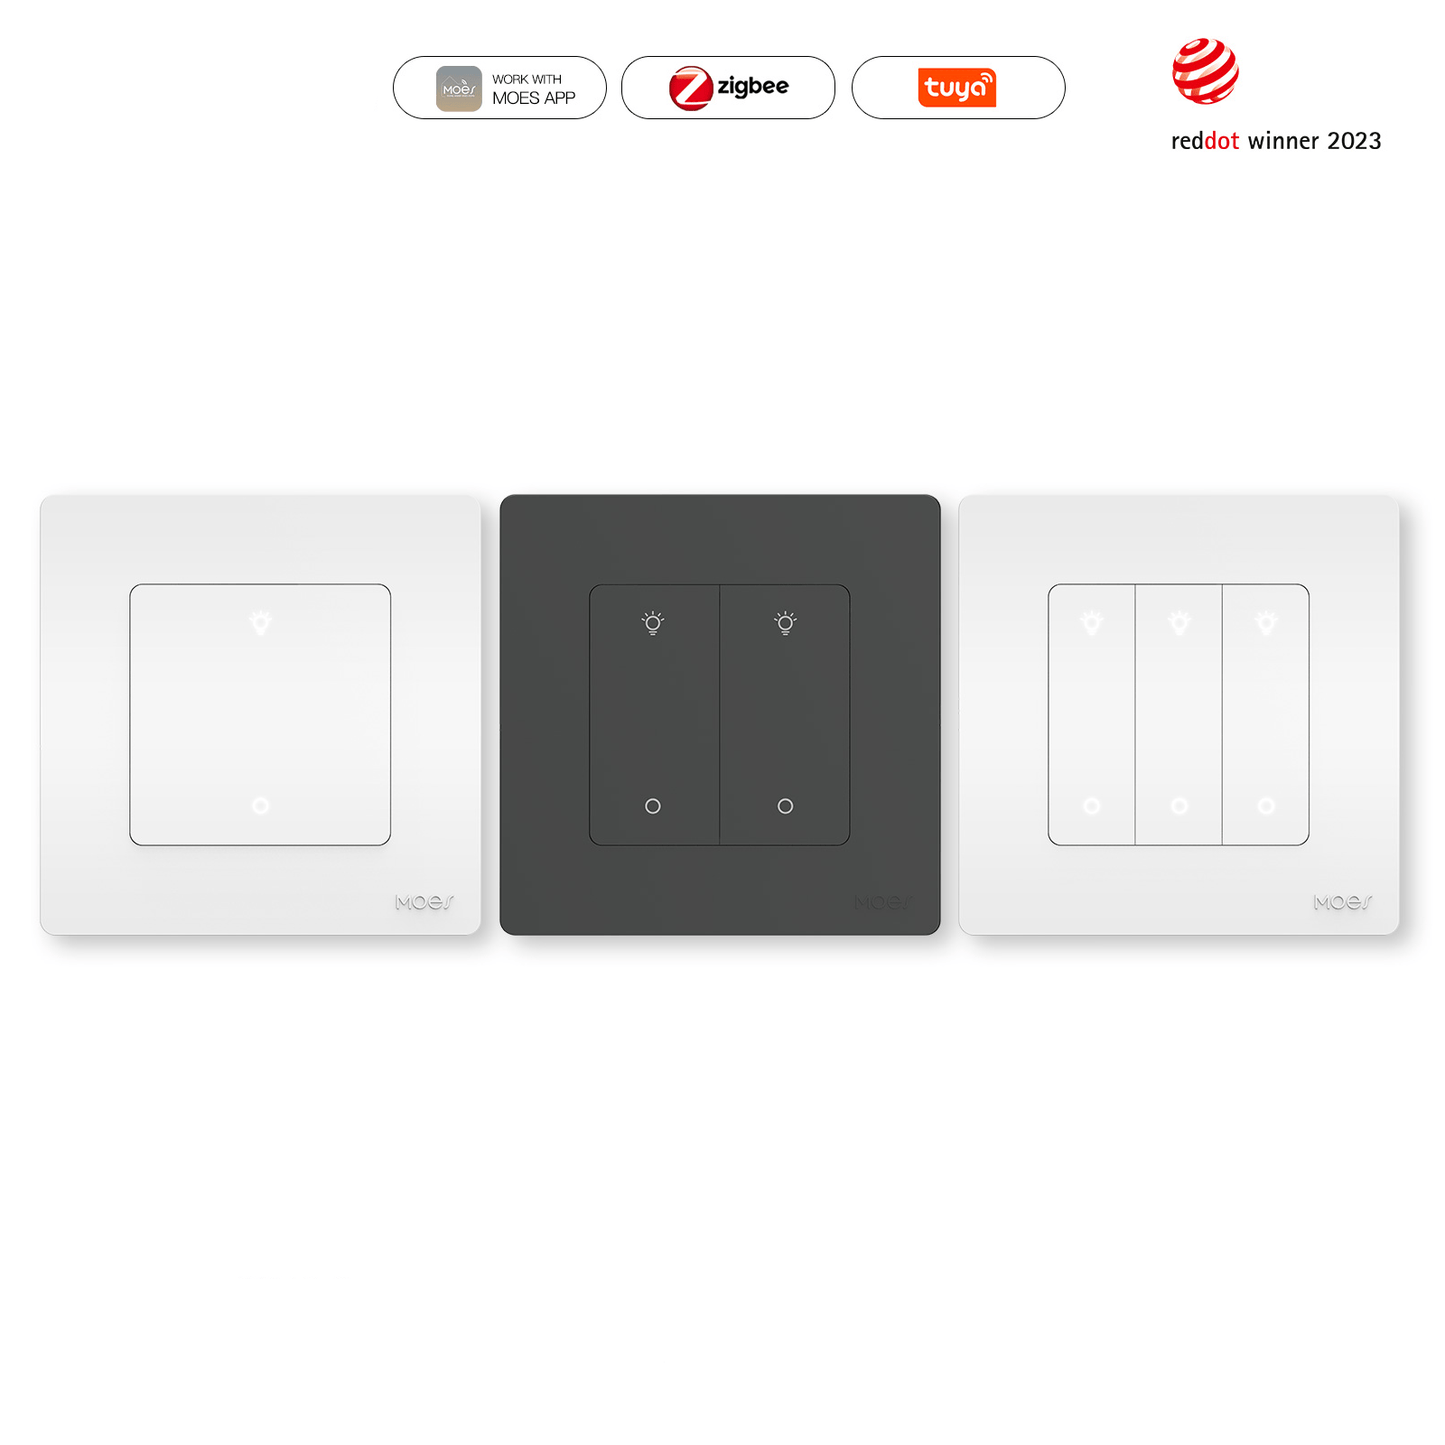 MOES Star Ring ZigBee Smart Dimmer Switch for Light Dimming Work with Alexa Google Home Dimmable 1-3Gang - MOES